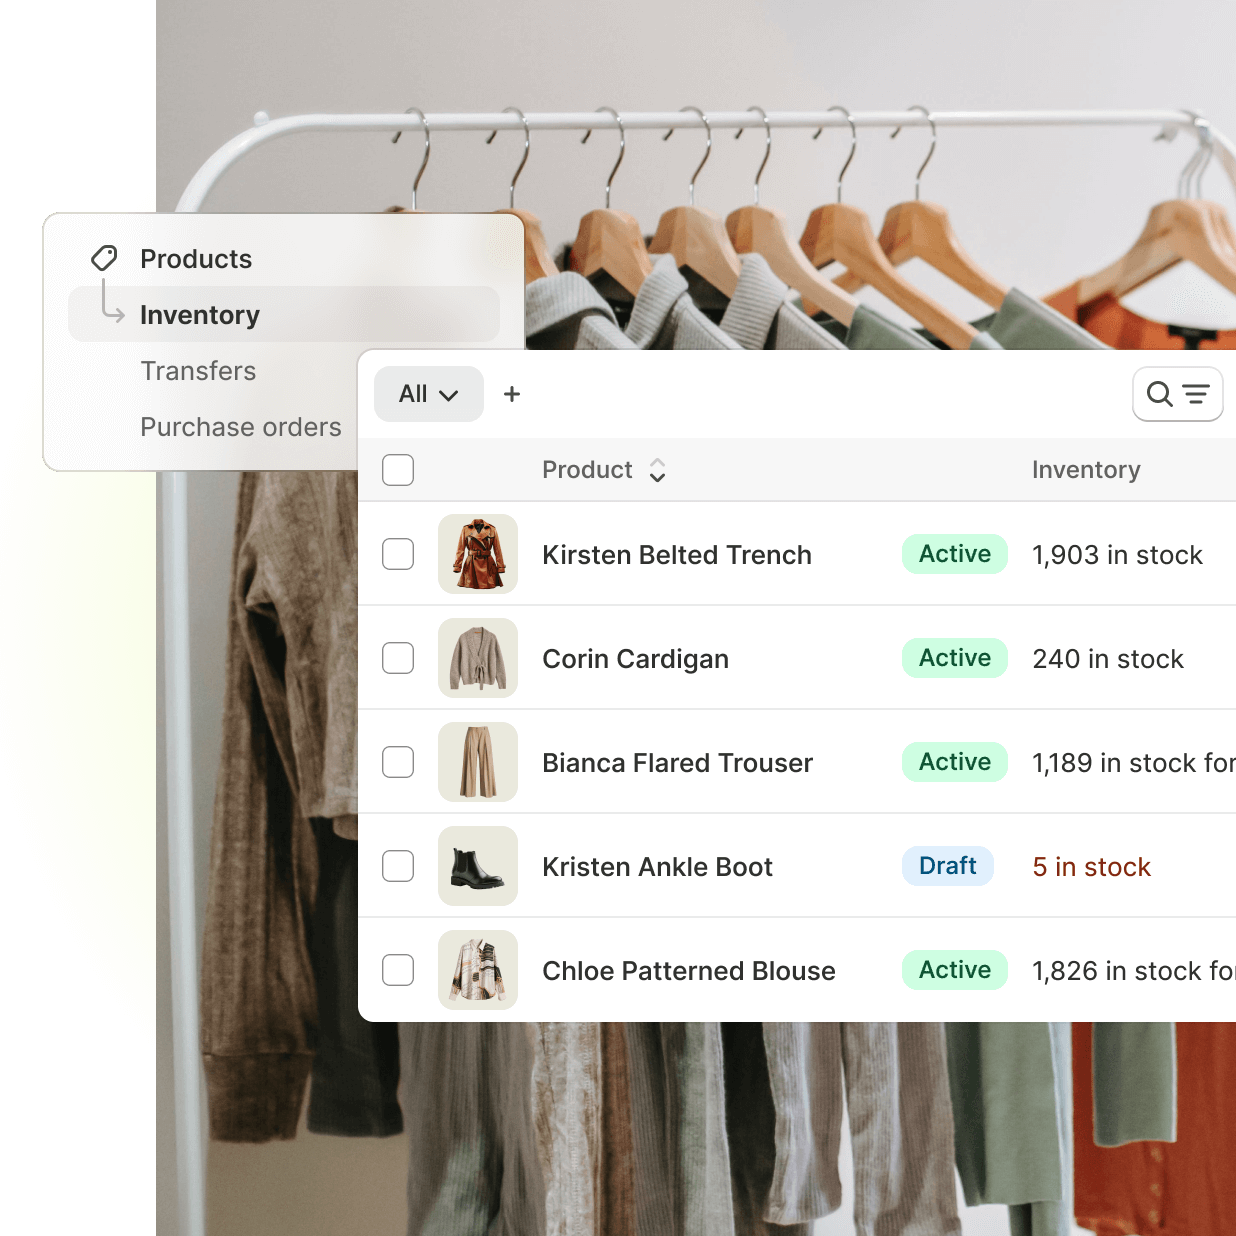 A small snapshot of Shopify Point of Sale displaying real-time inventory reporting of 4 apparel items to showcase Shopify’s integrated inventory status updates.